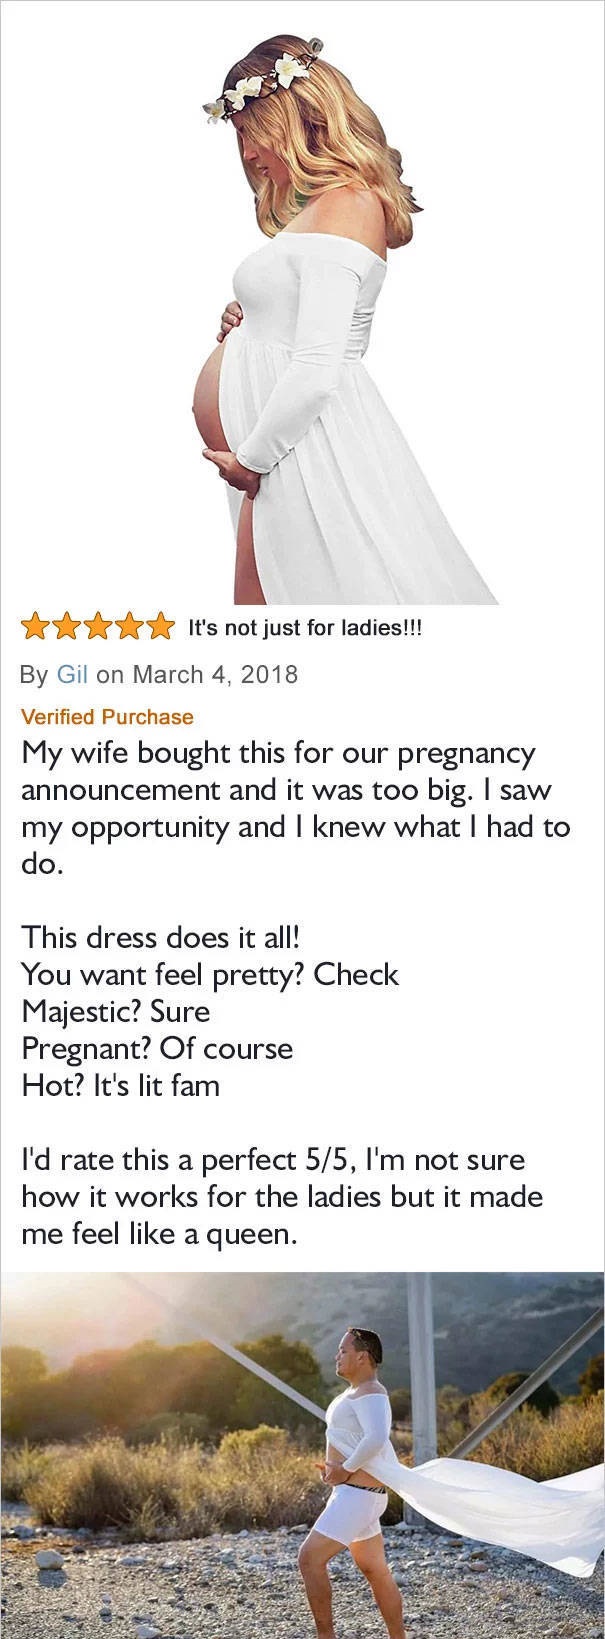 29 Hilarious Amazon Reviews That Deserve 5 Stars - Funny Gallery